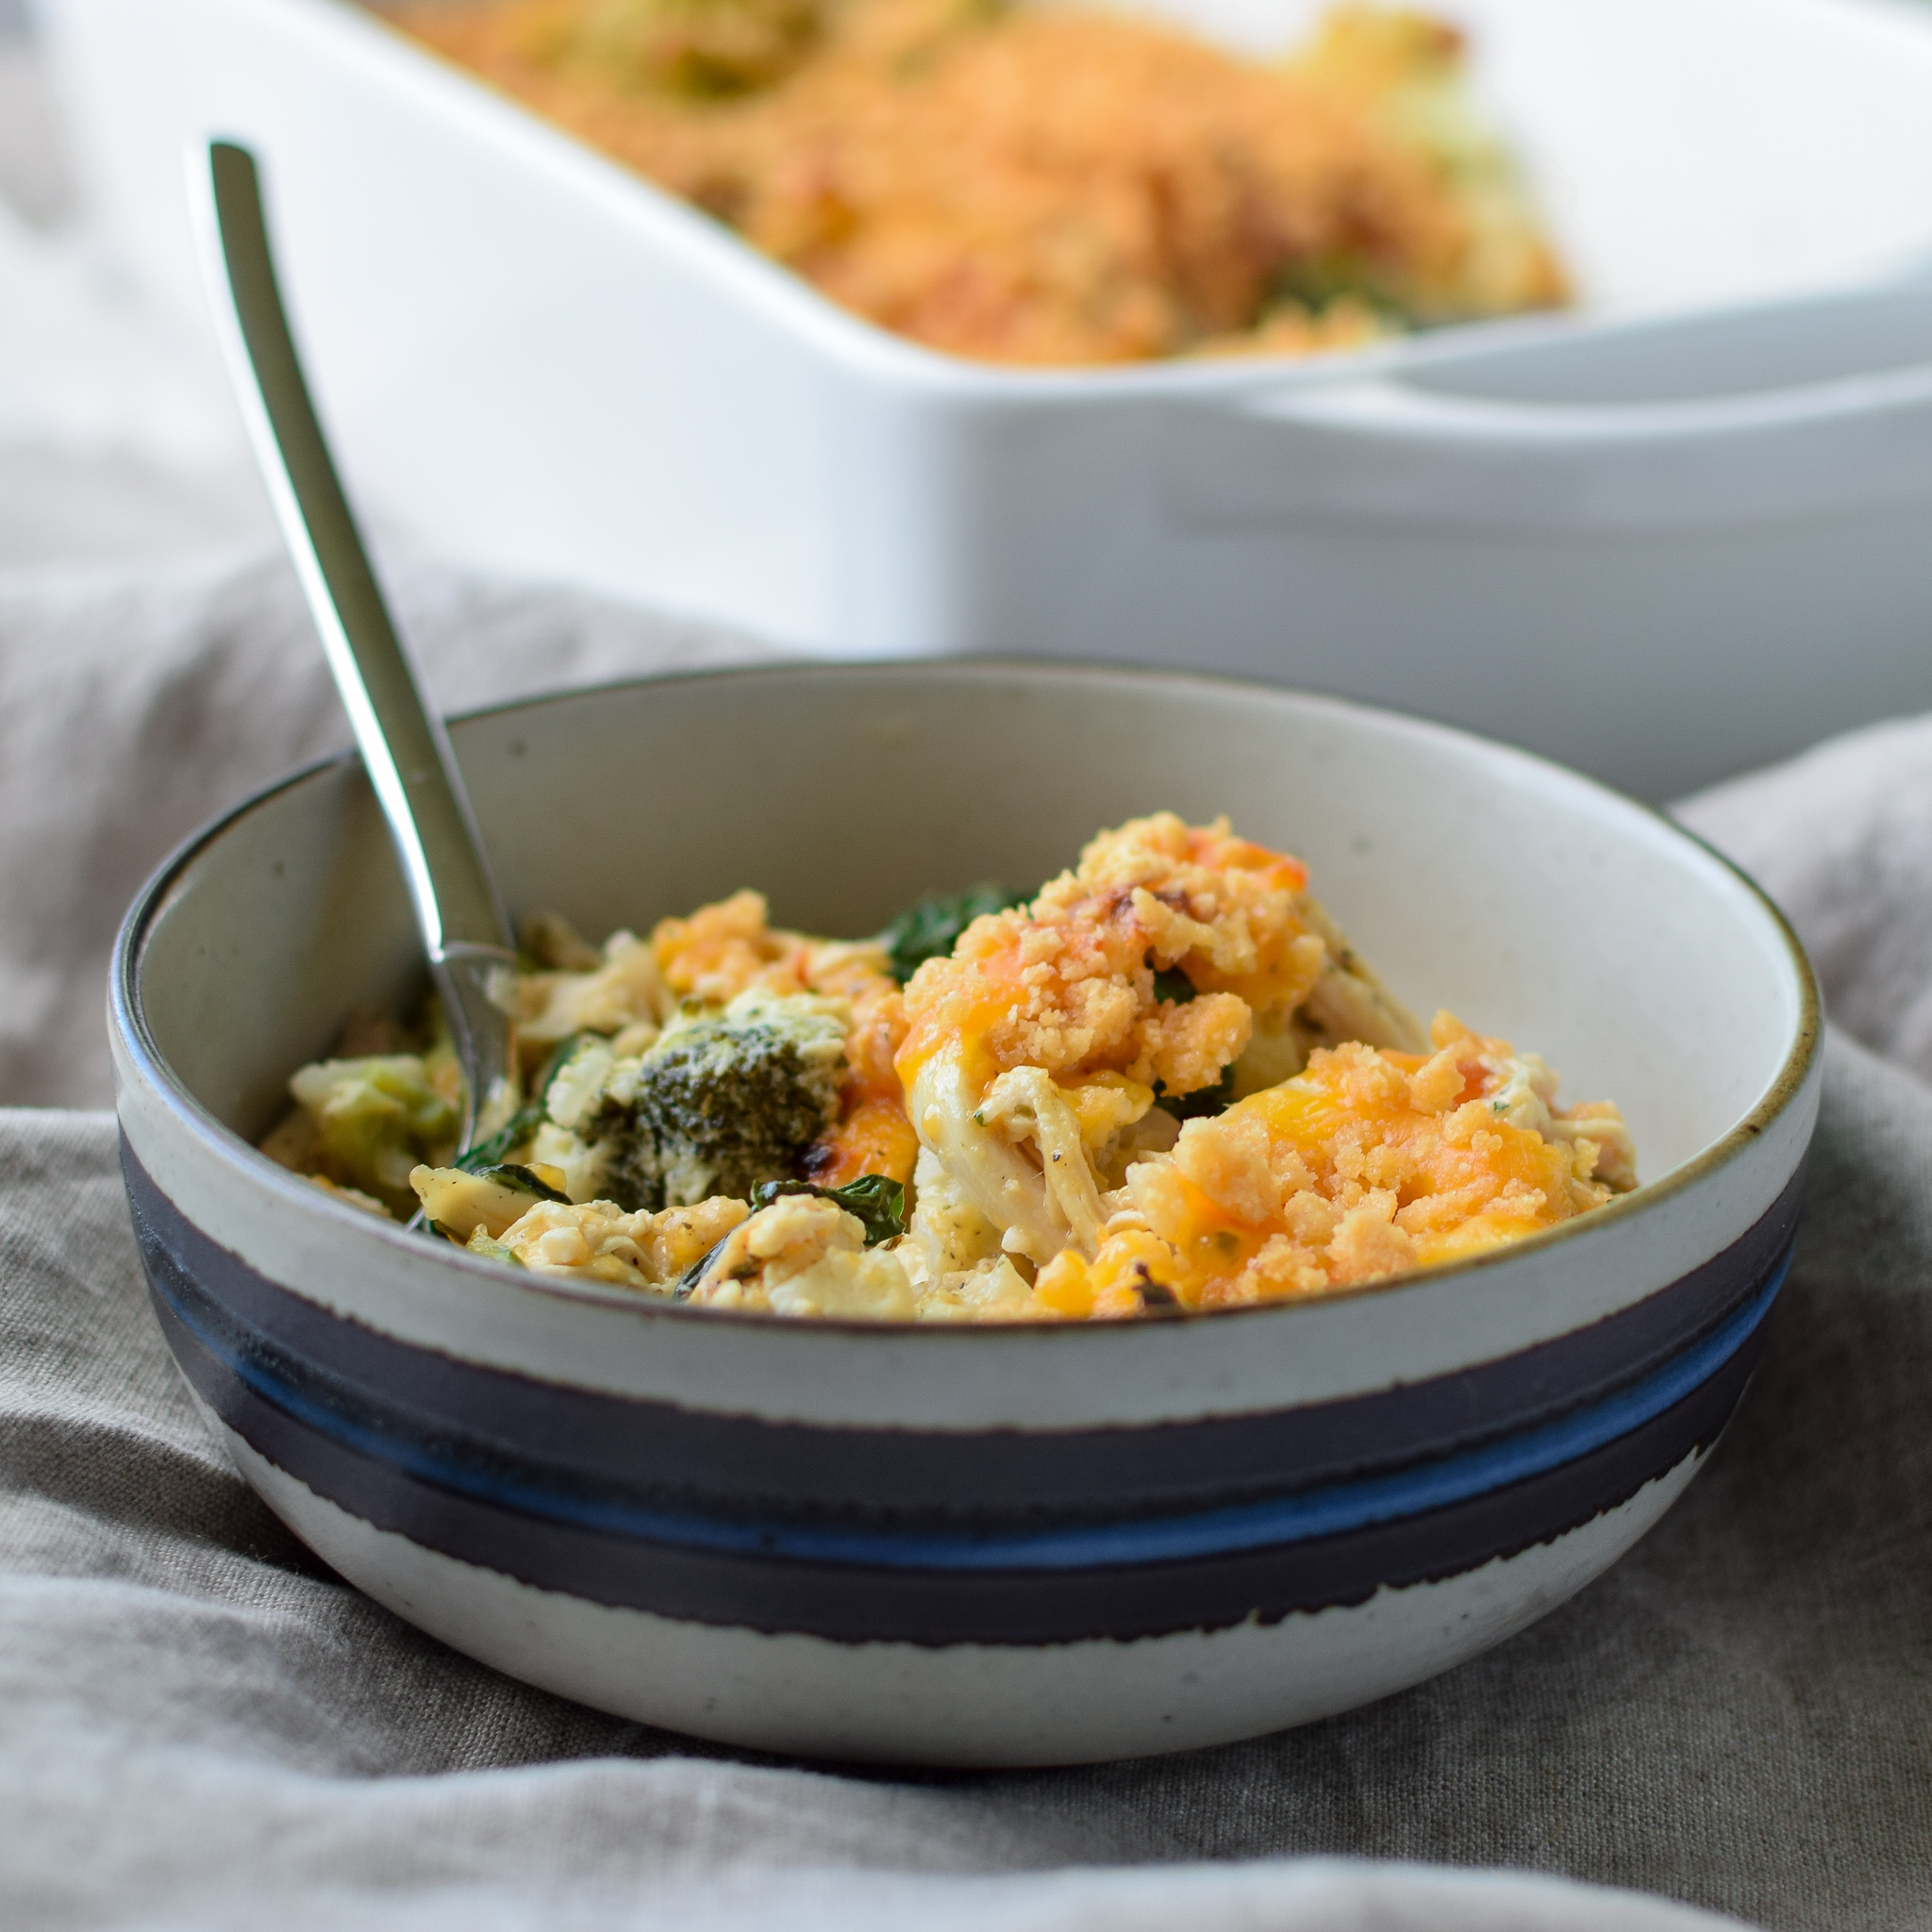 A fresh dished up bowl of Veggie Loaded Rotisserie Chicken Casserole.